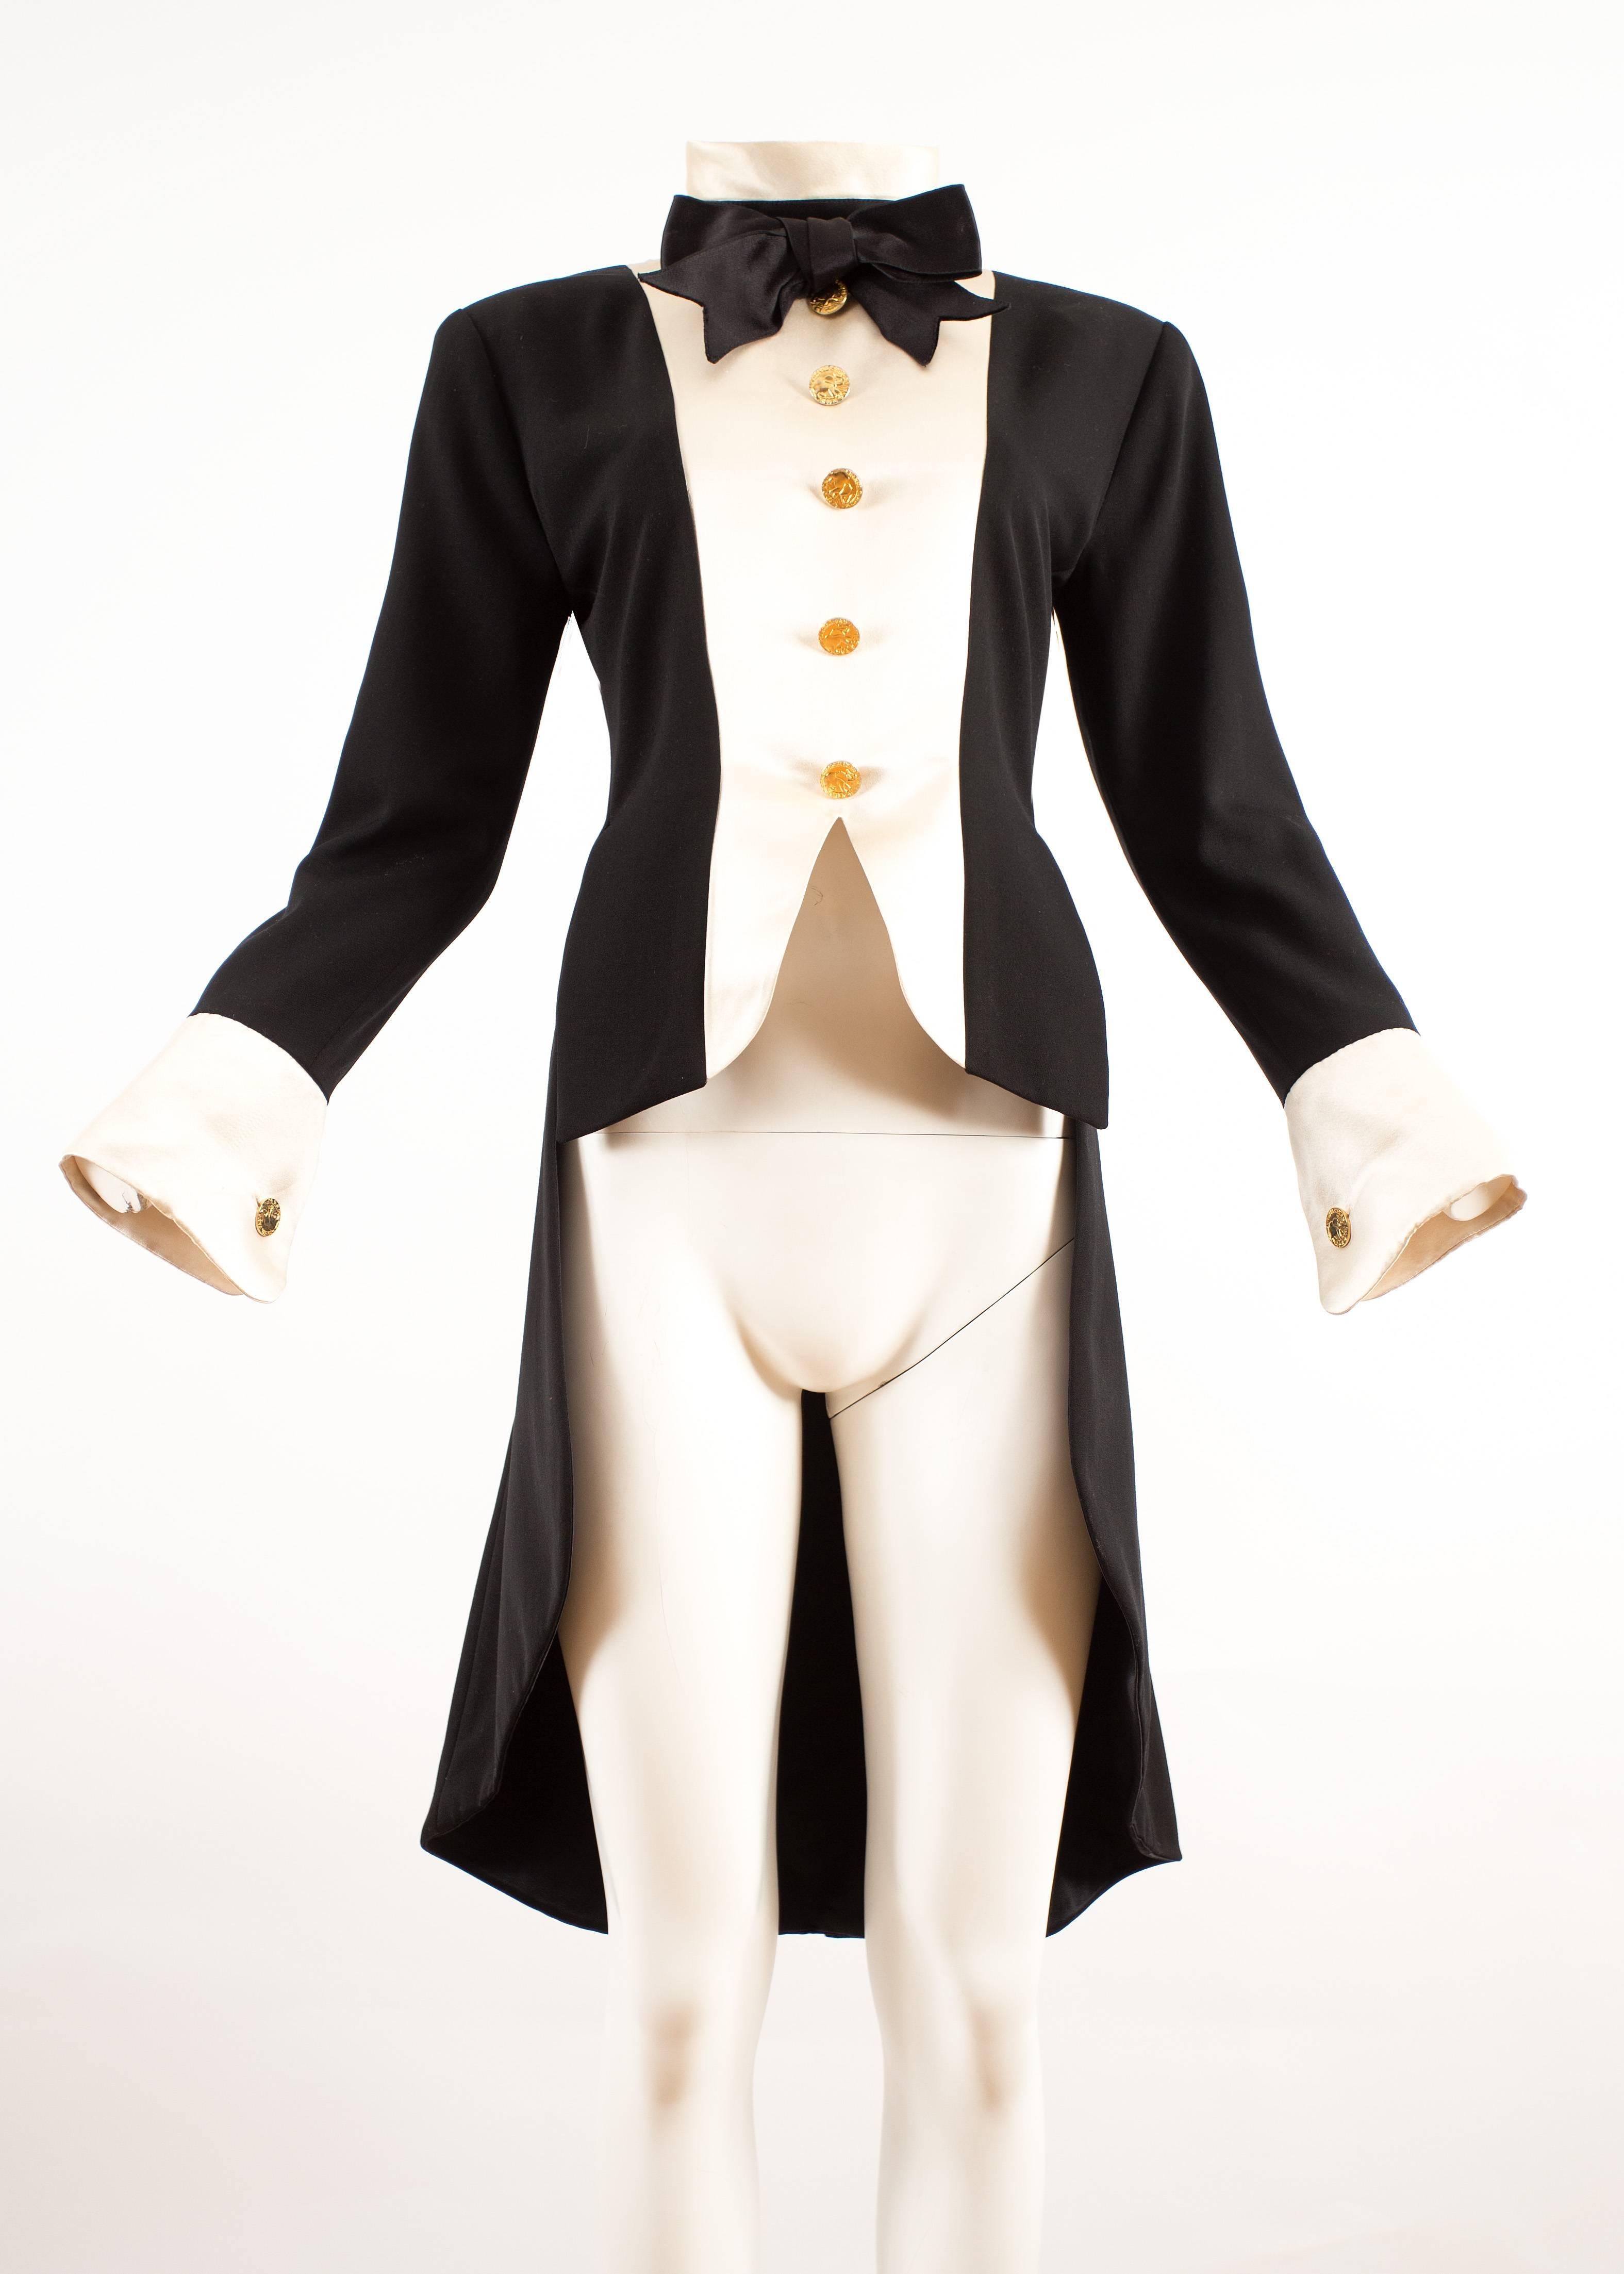 Chanel 1980s black silk evening tailcoat 

- gold-tone buttons
- ivory coloured silk 
- black silk bow tie 
- zip fastening 
